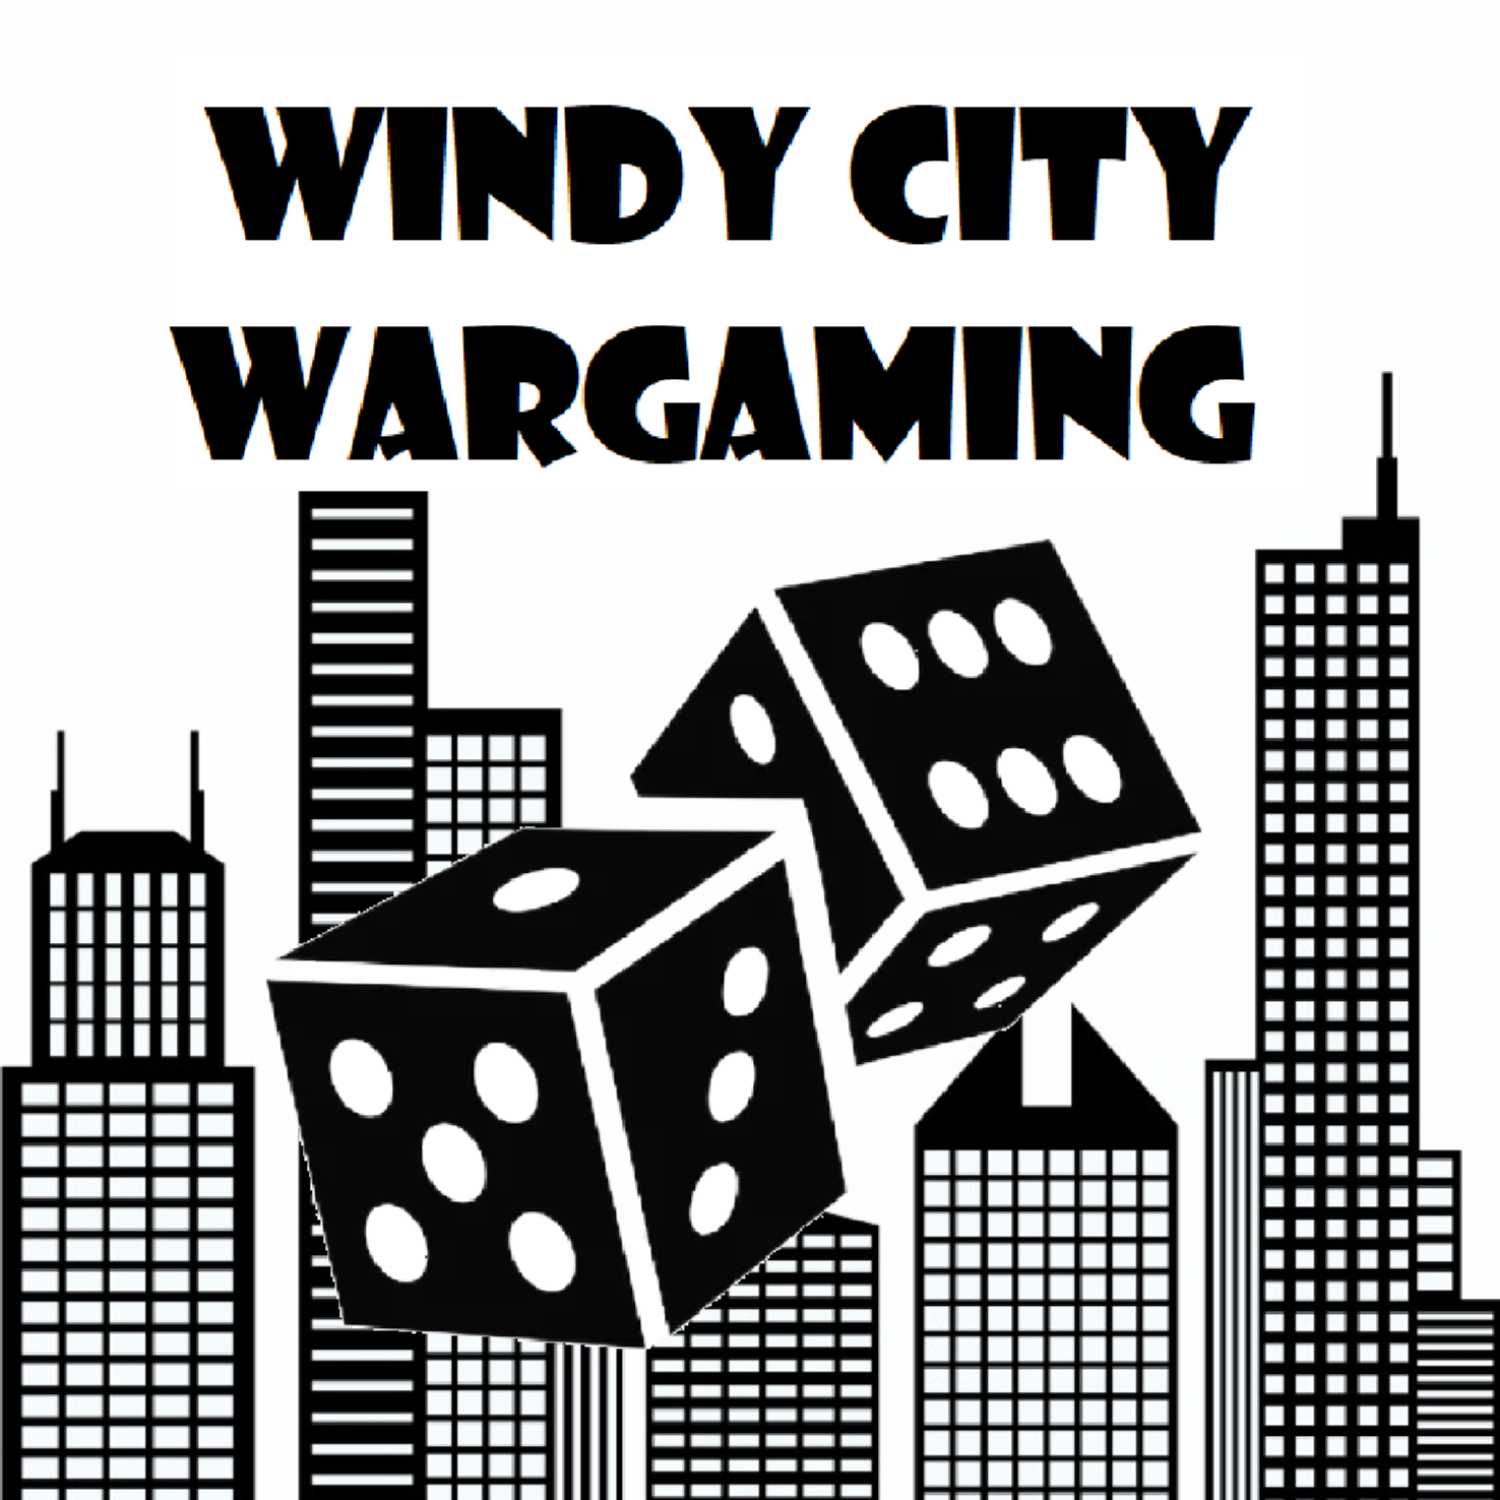 WCW EP5 - Warmachine and Adepticon